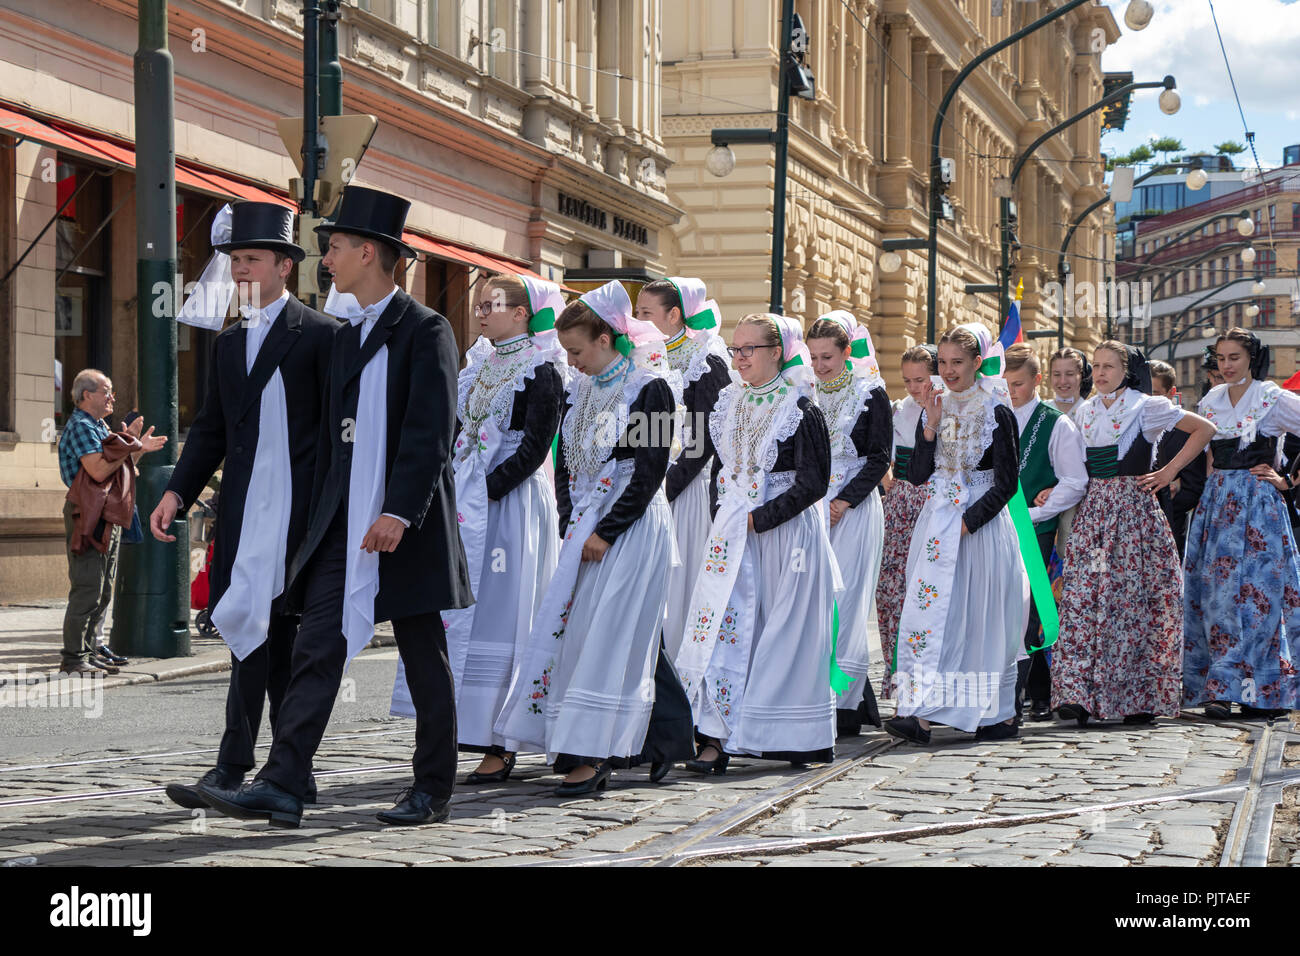 PRAGUE, CZECH REPUBLIC - JULY 1, 2018: People in folk costumes parading at Sokolsky Slet, a once-every-six-years gathering of the Sokol movement - a C Stock Photo